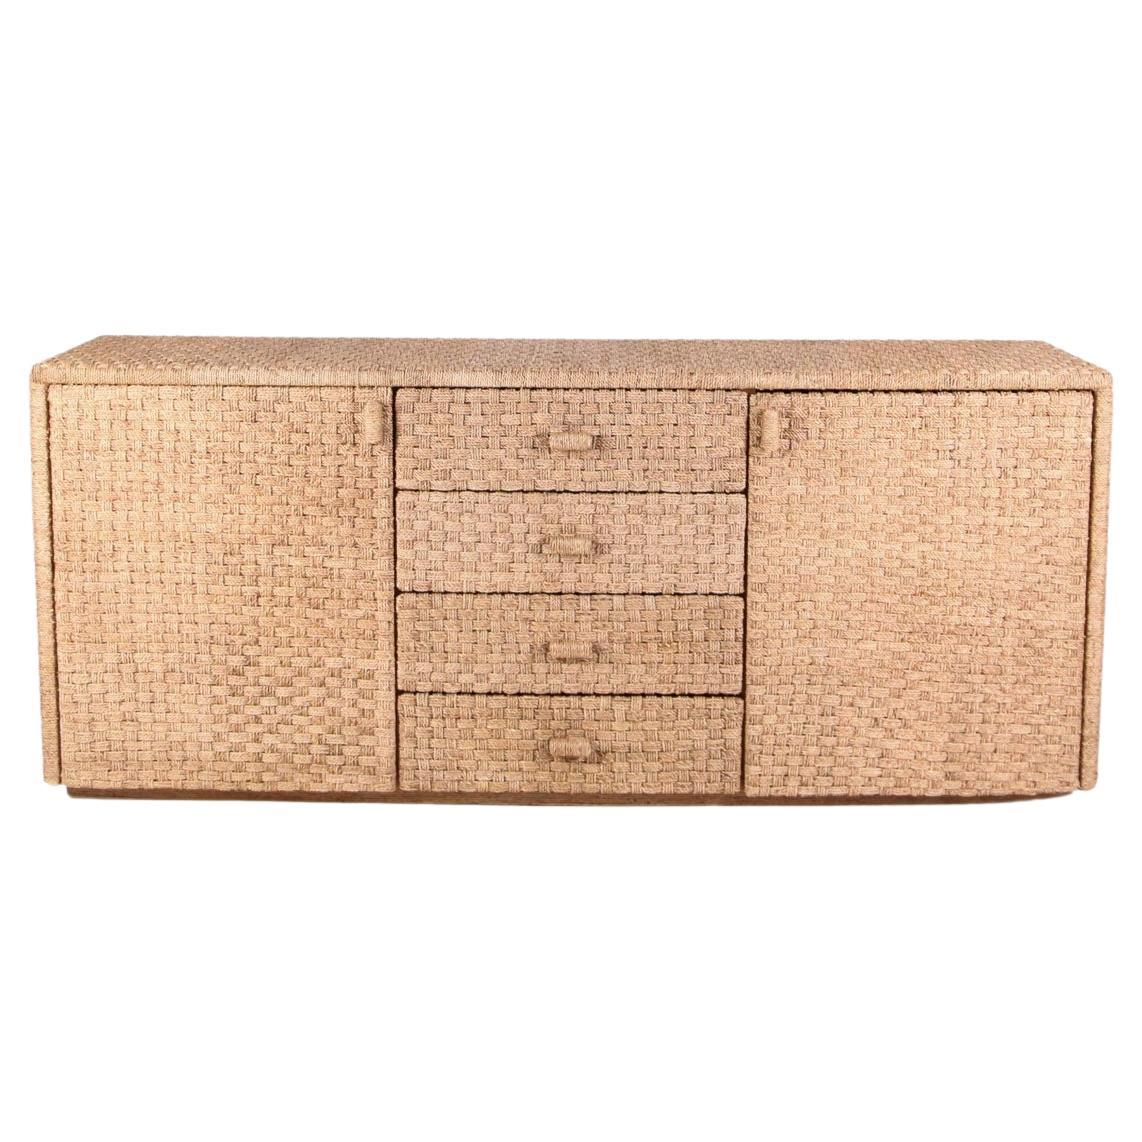 Braided seagrass sideboard 